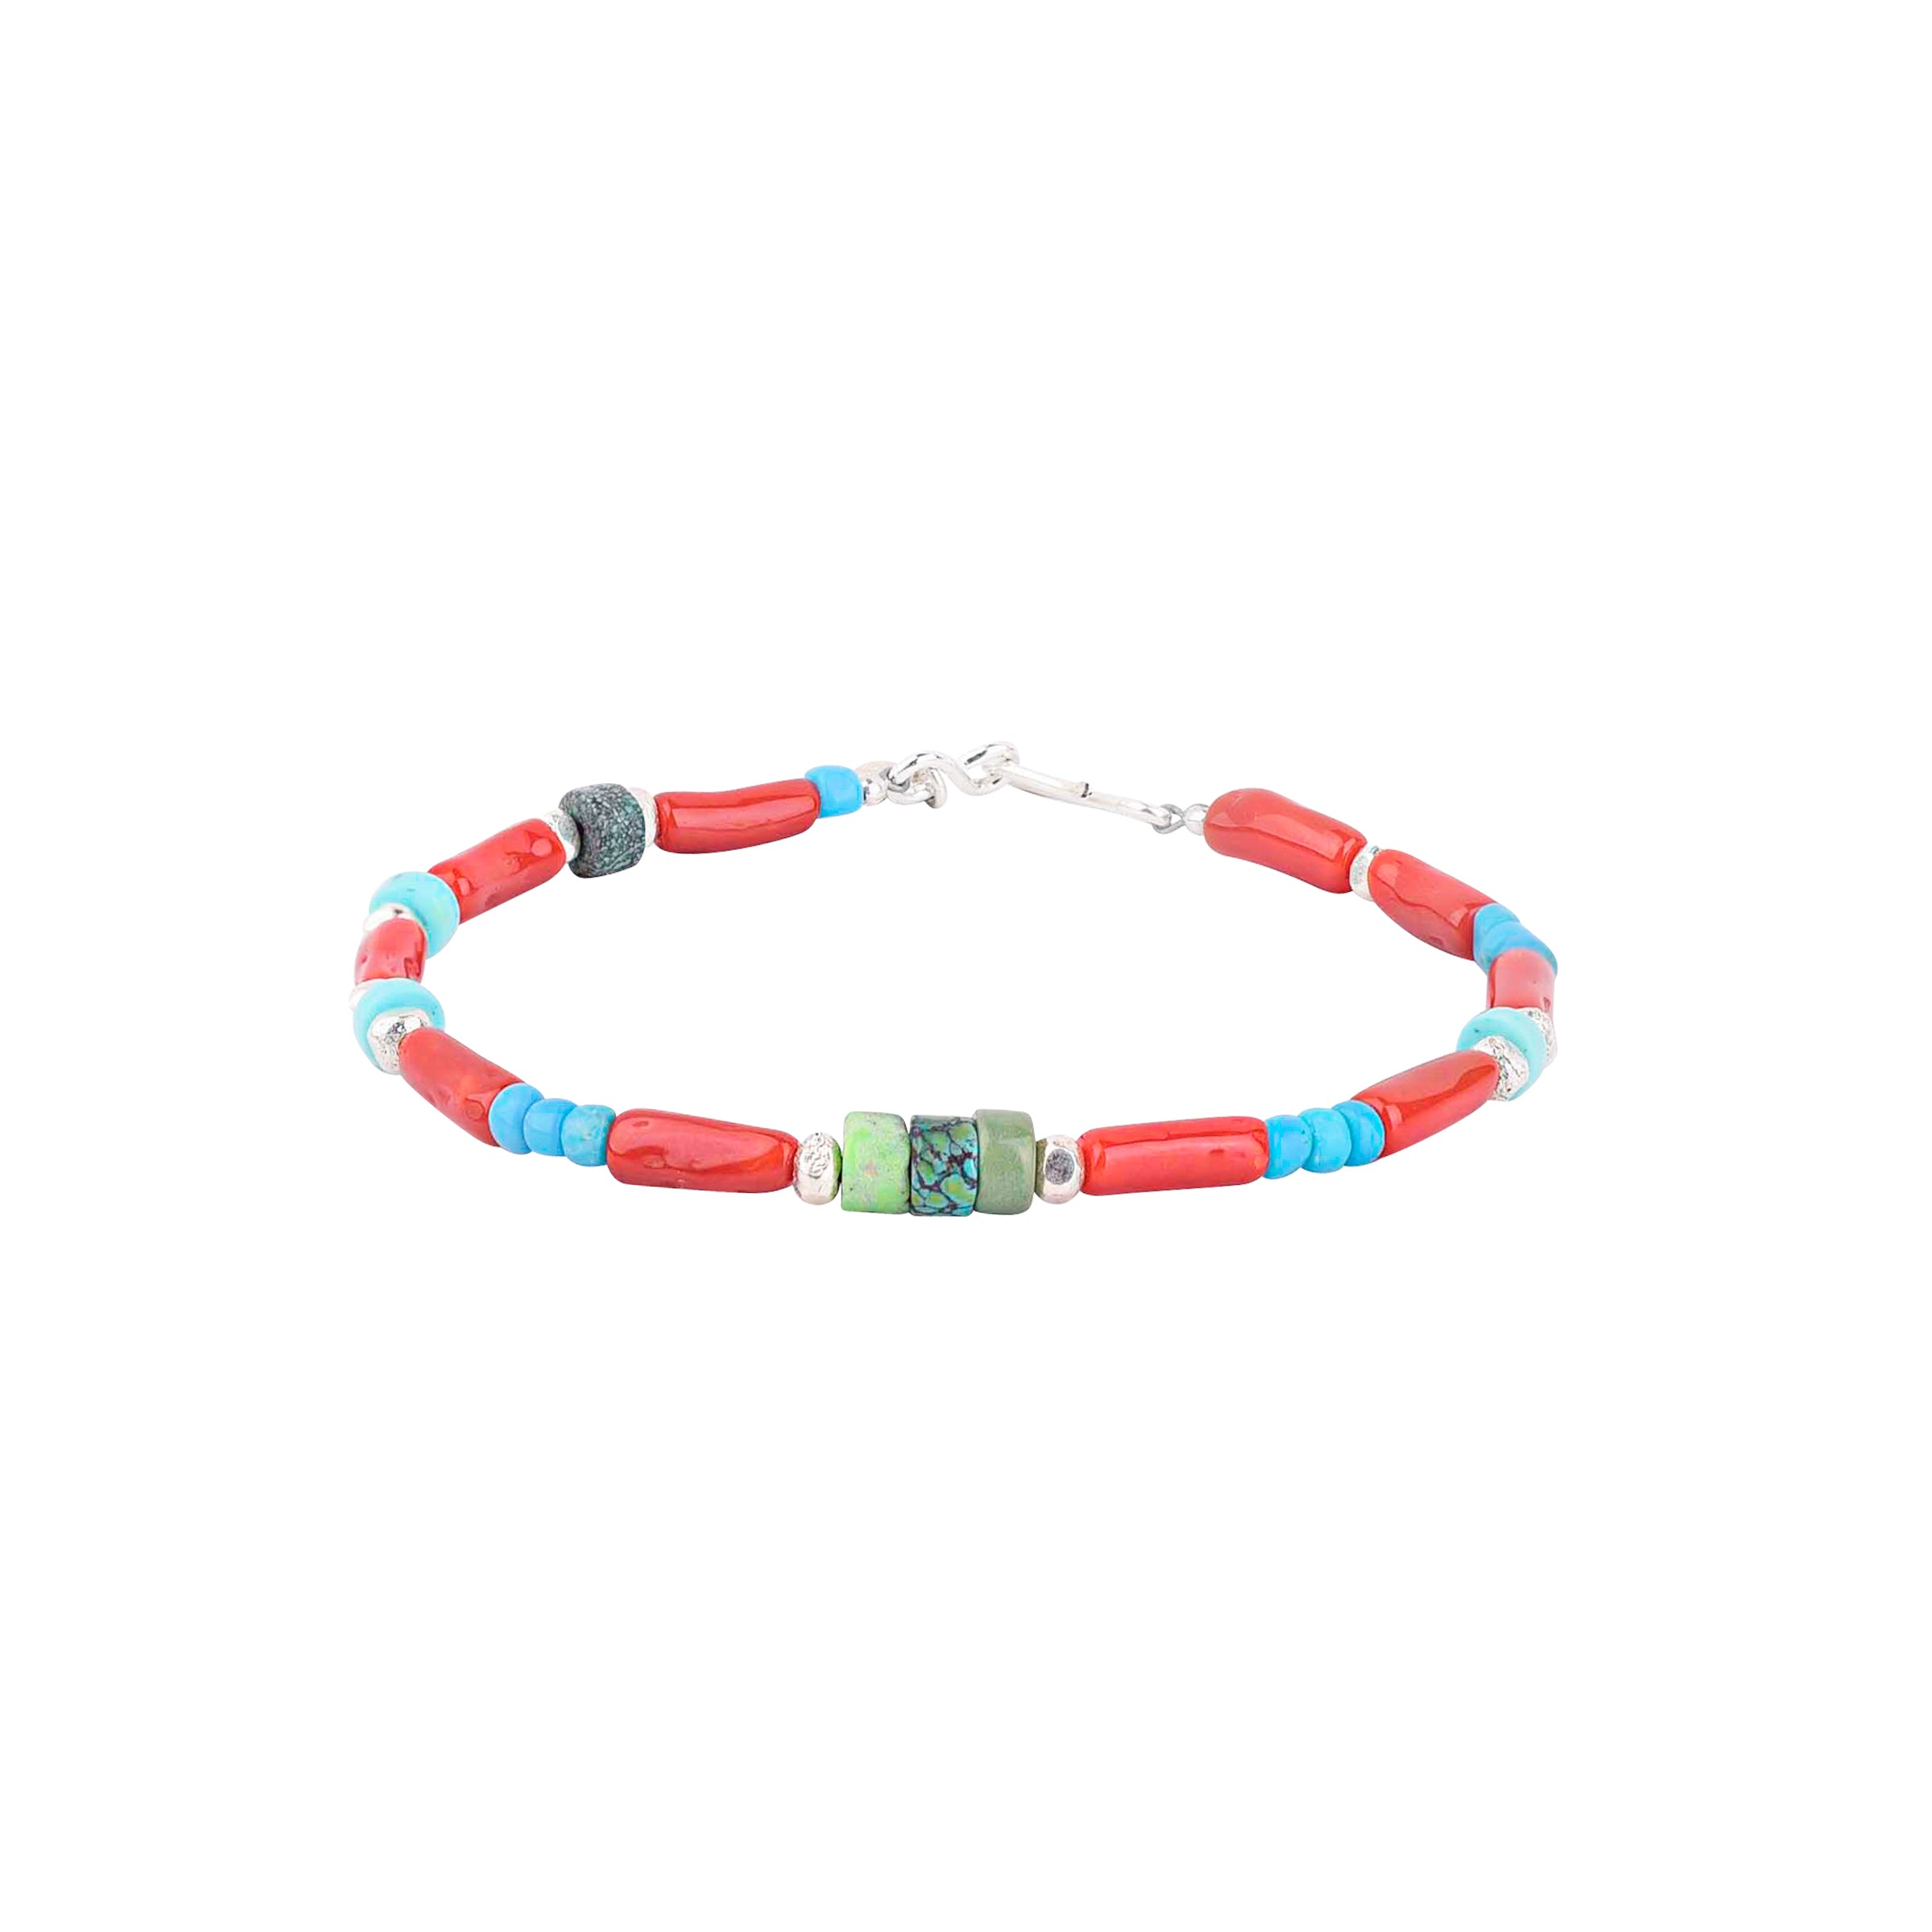 Red Coral and Turquoise Bracelet